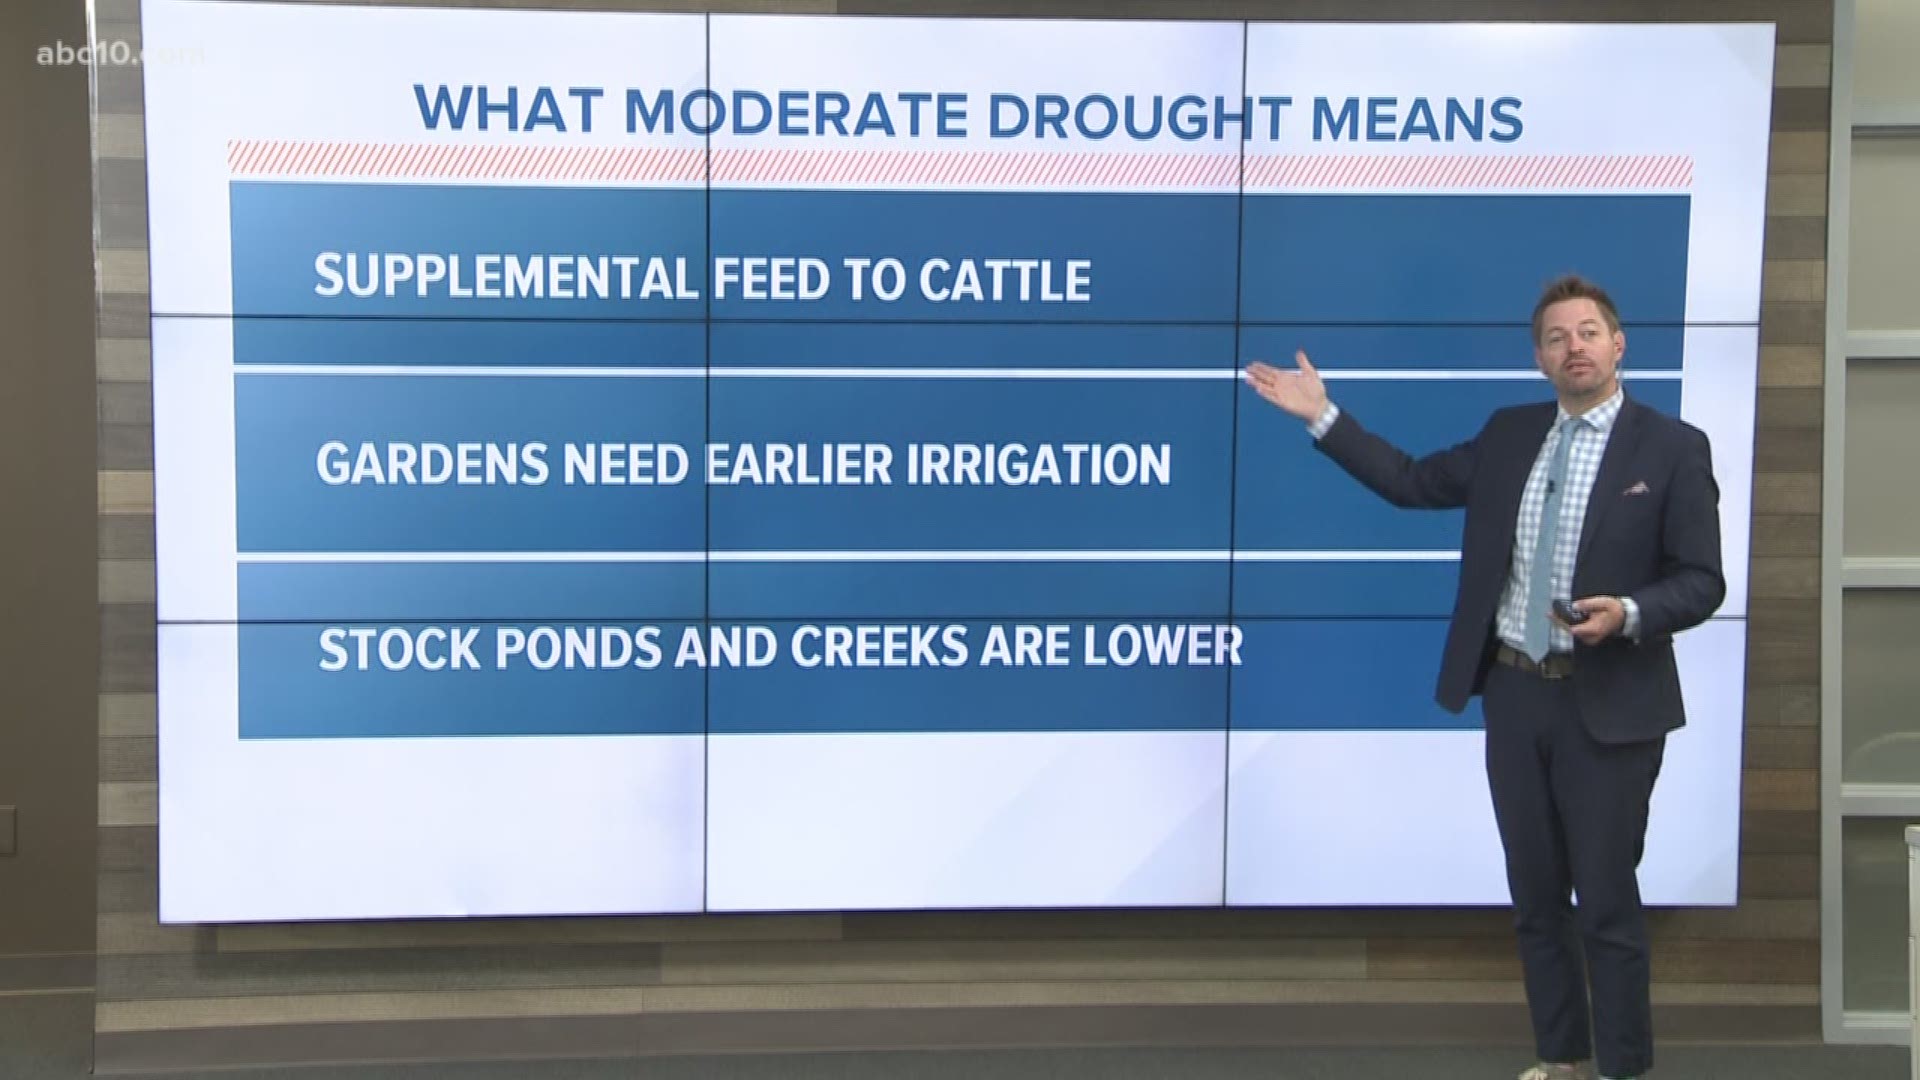 In today's Geek Lab, Rob discusses what this abnormally dry February is doing to drought conditions. And what a "moderate drought" means for farmers.